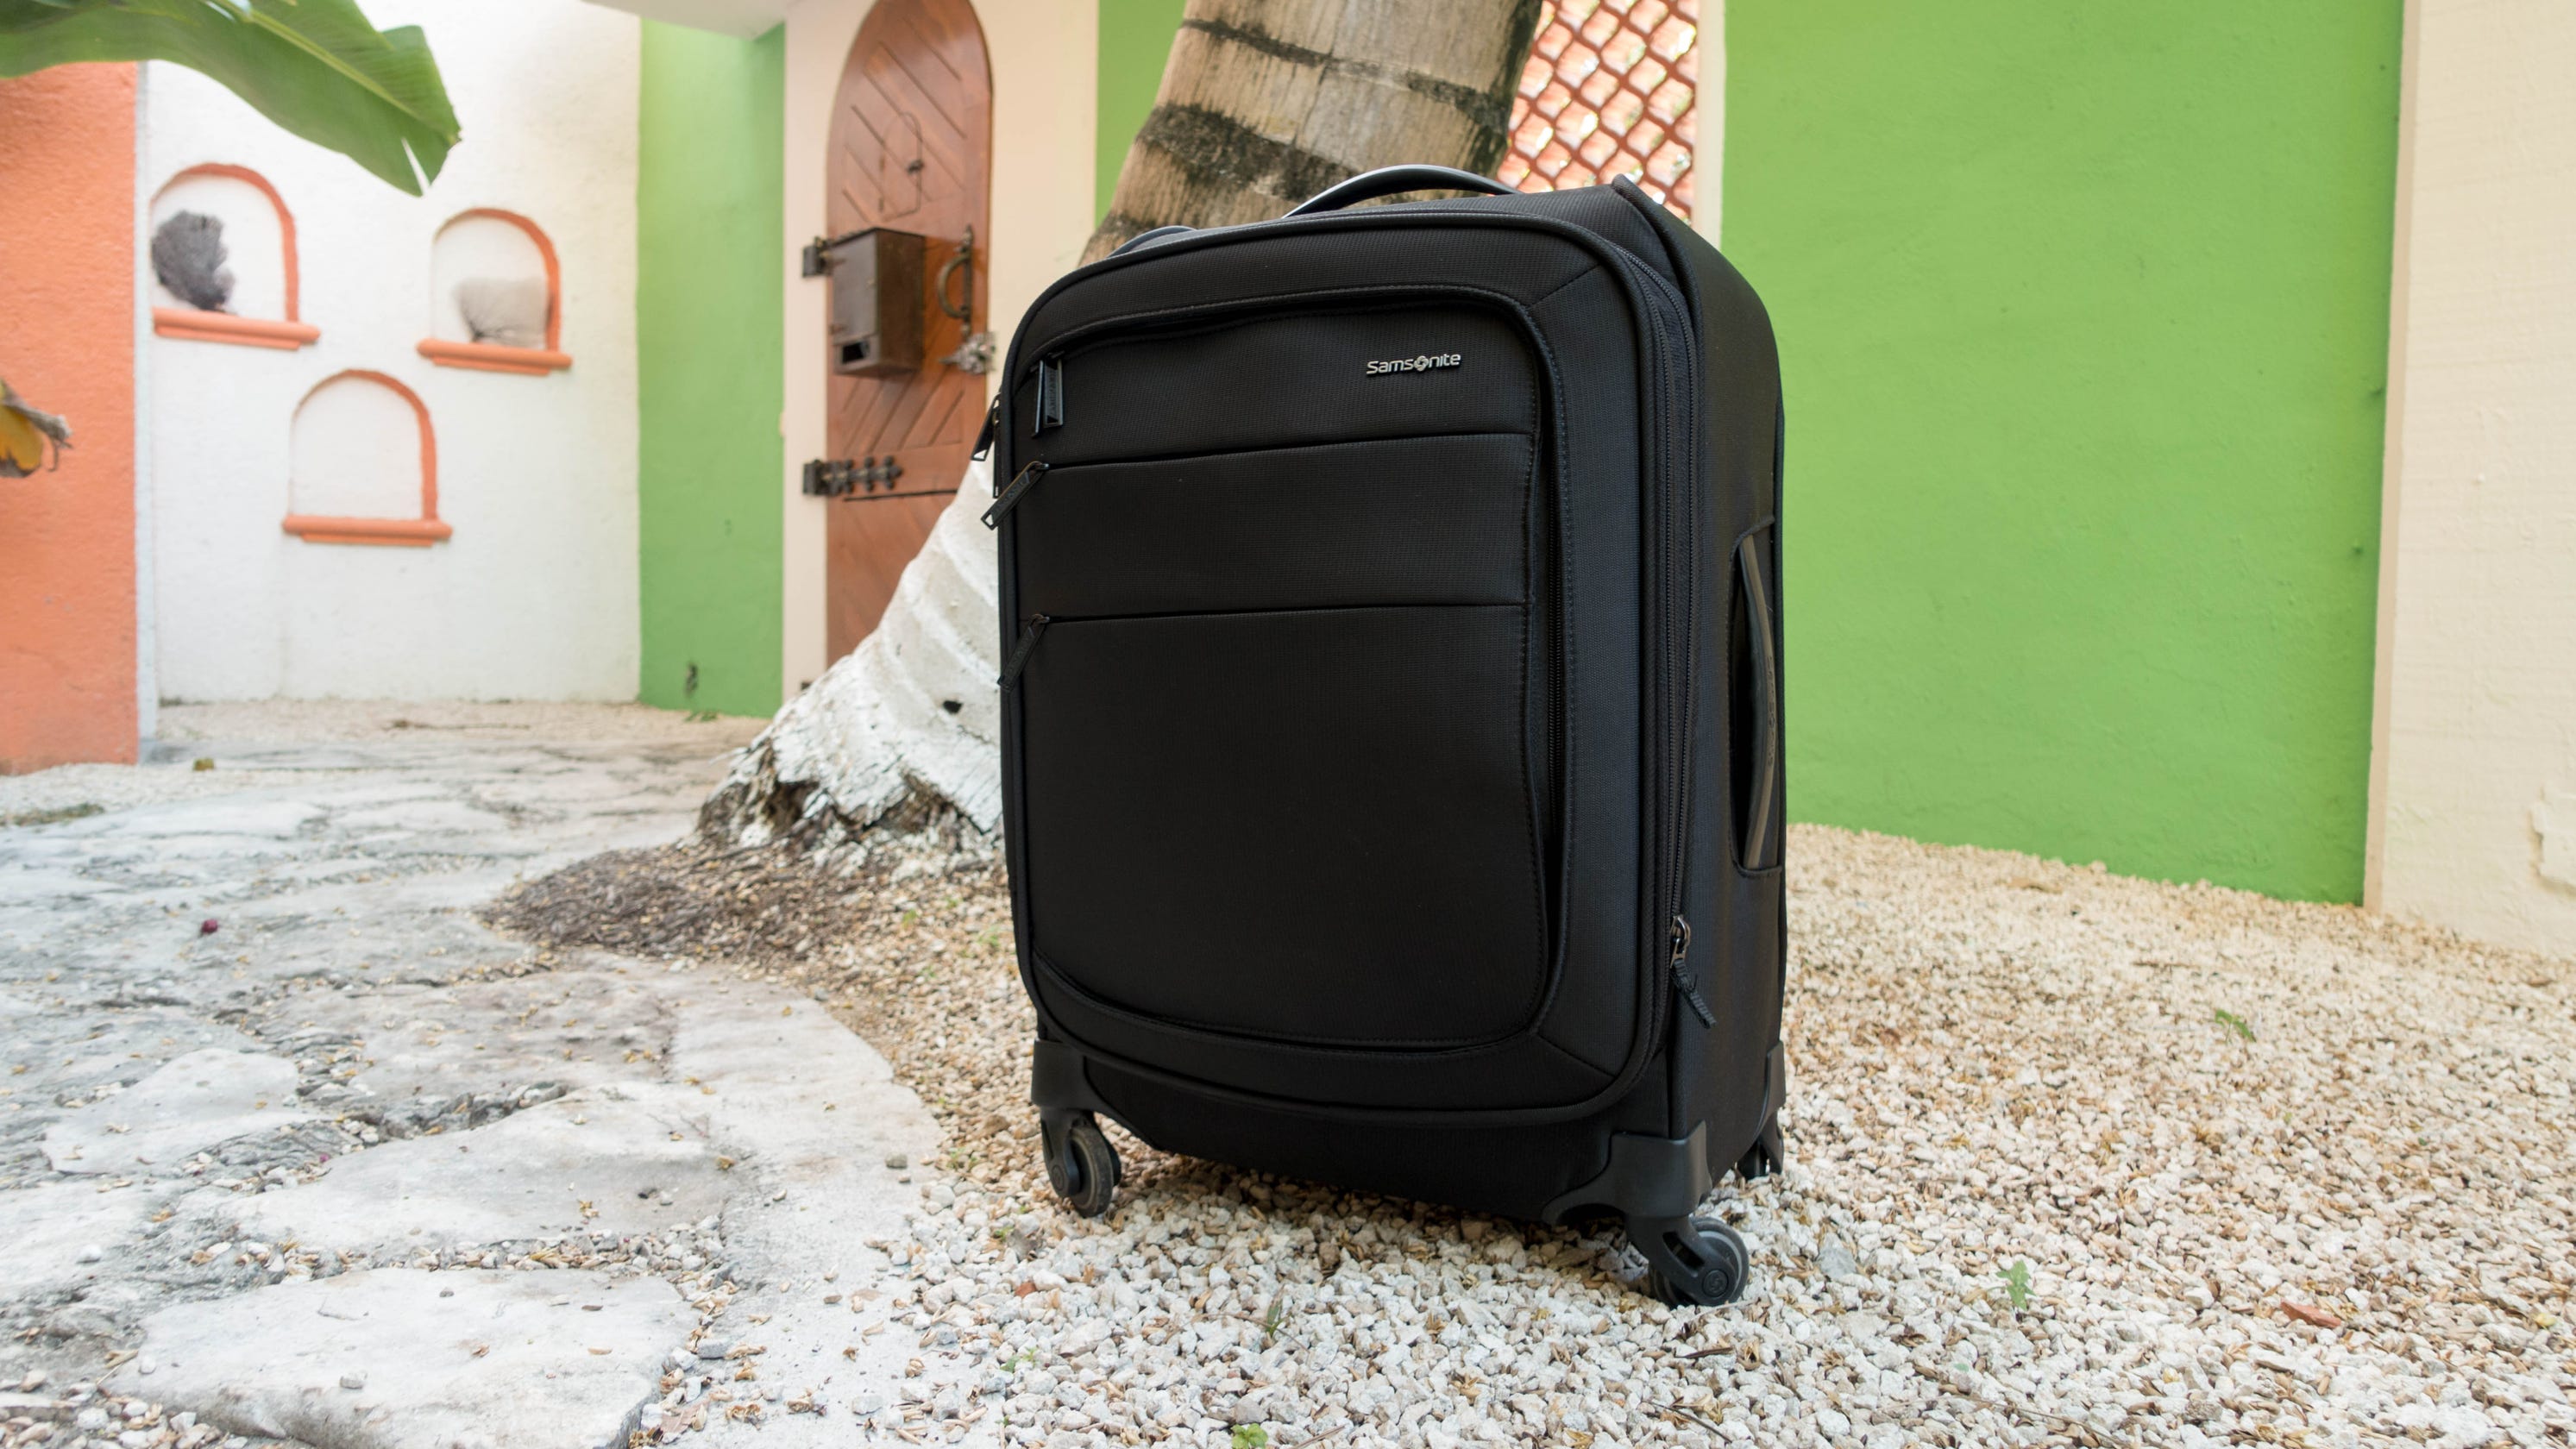 Samsonite is having a massive luggage sale right now